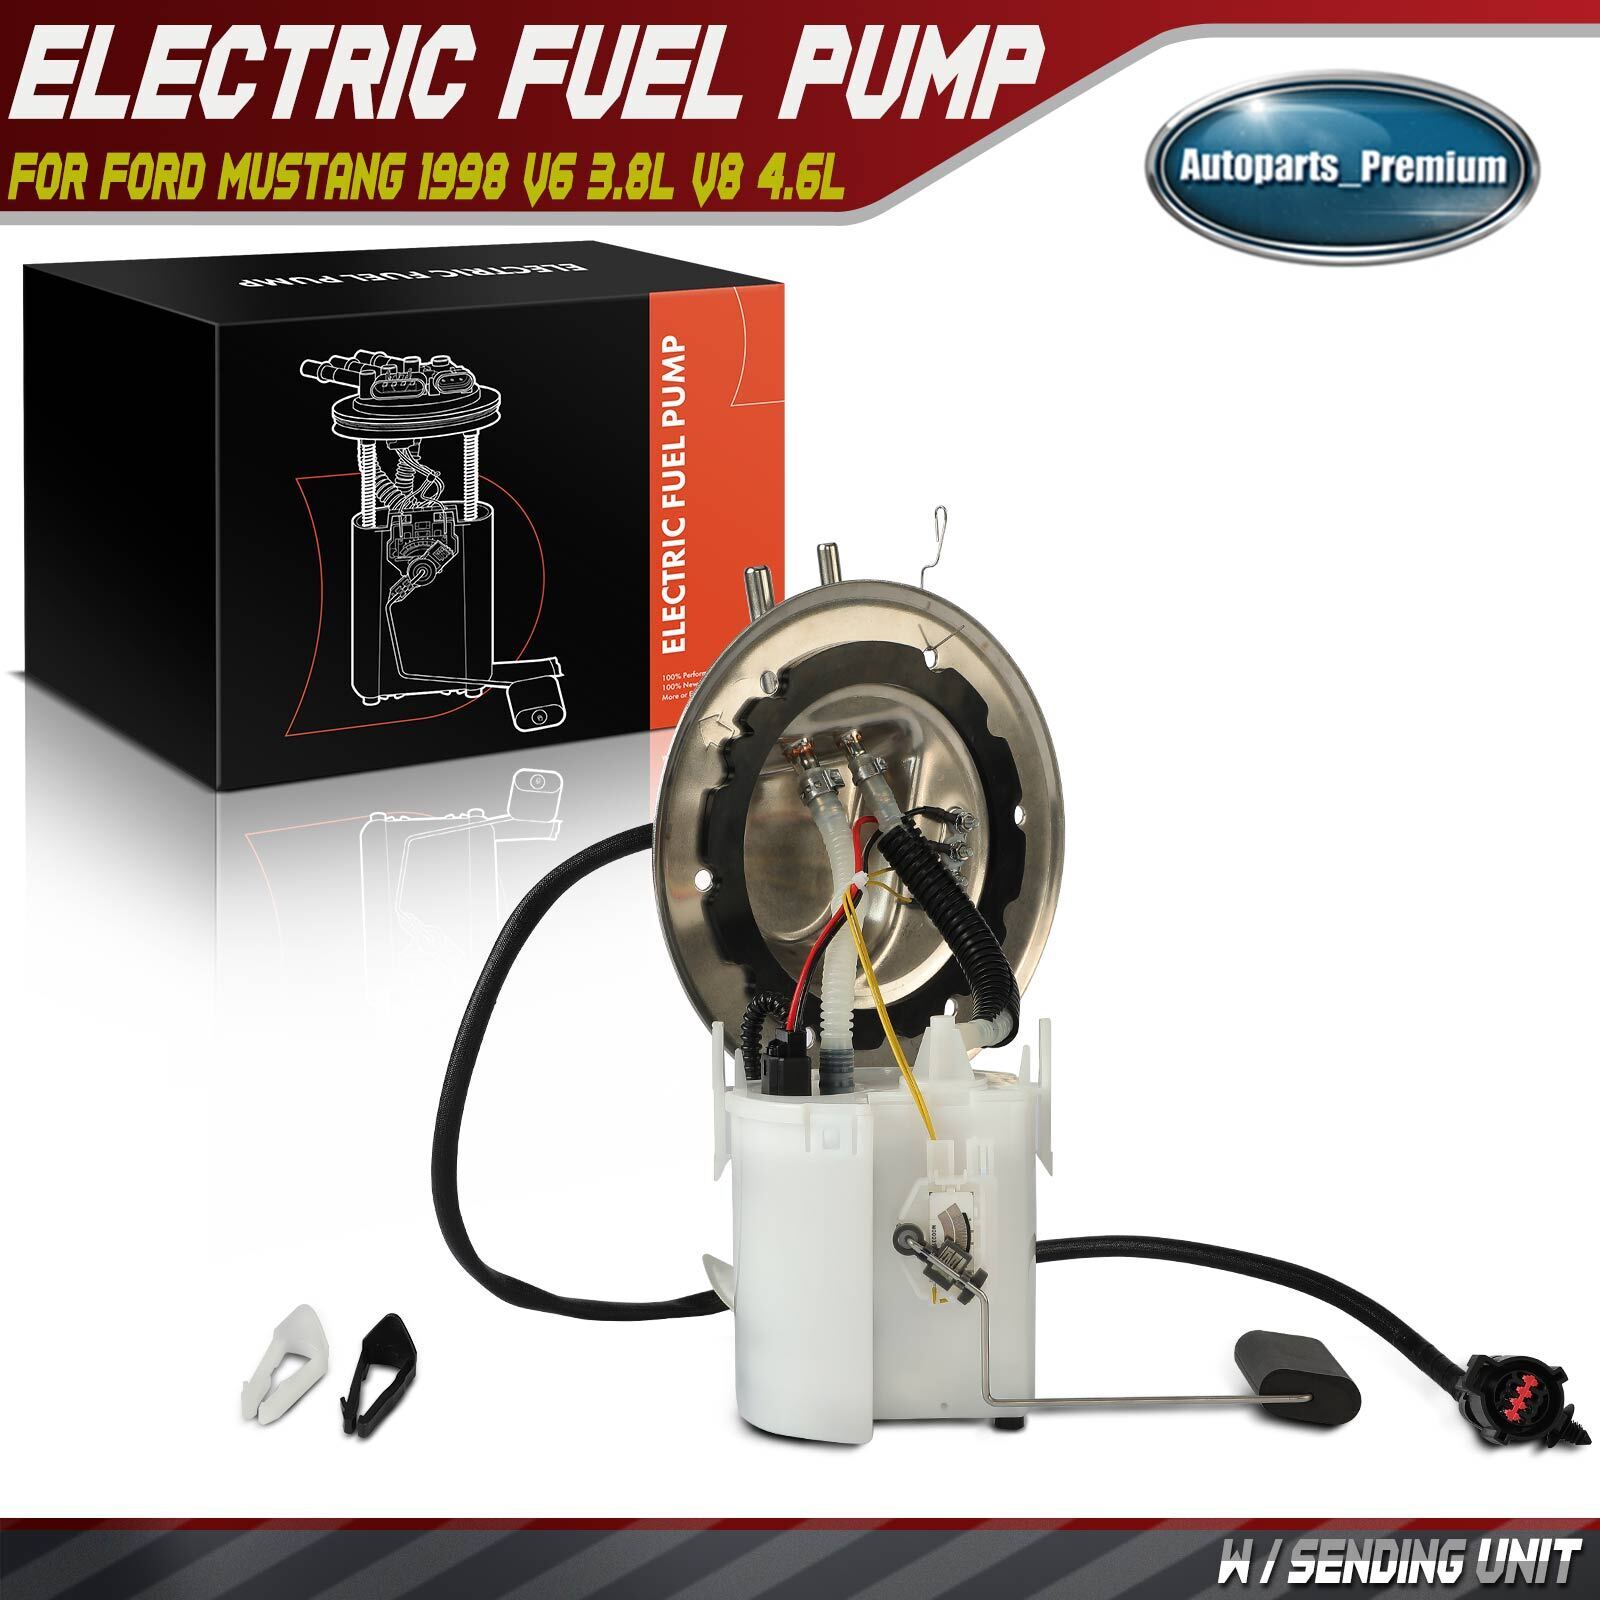 Fuel Pump Module Assembly for Ford Mustang Except California 1998 3.8L 4.6L